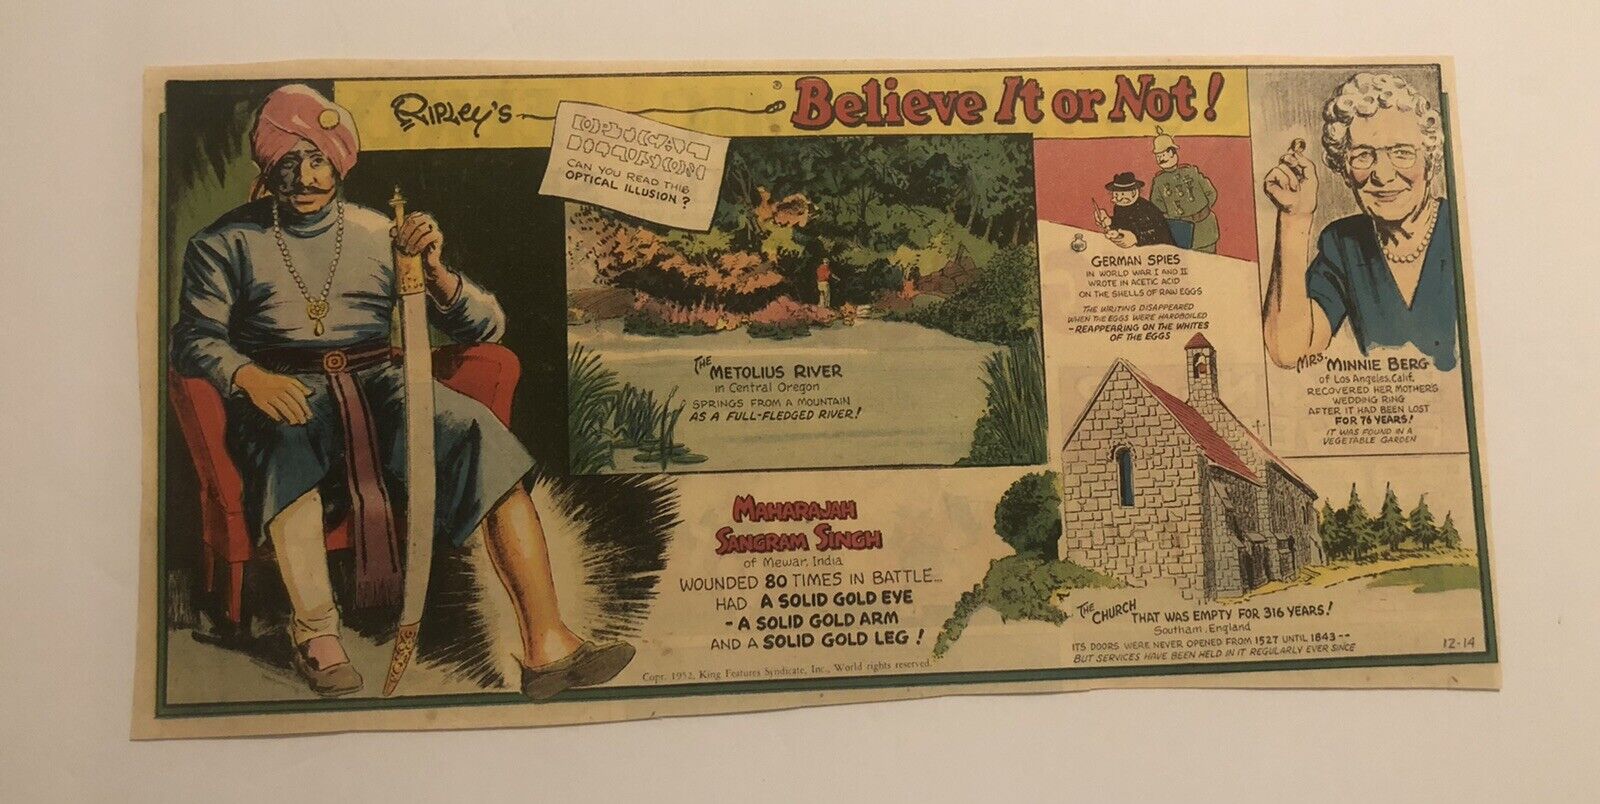 1950’s Ripley’s Believe It or Not Newspaper Comic Strip “India Man Gold Arm”